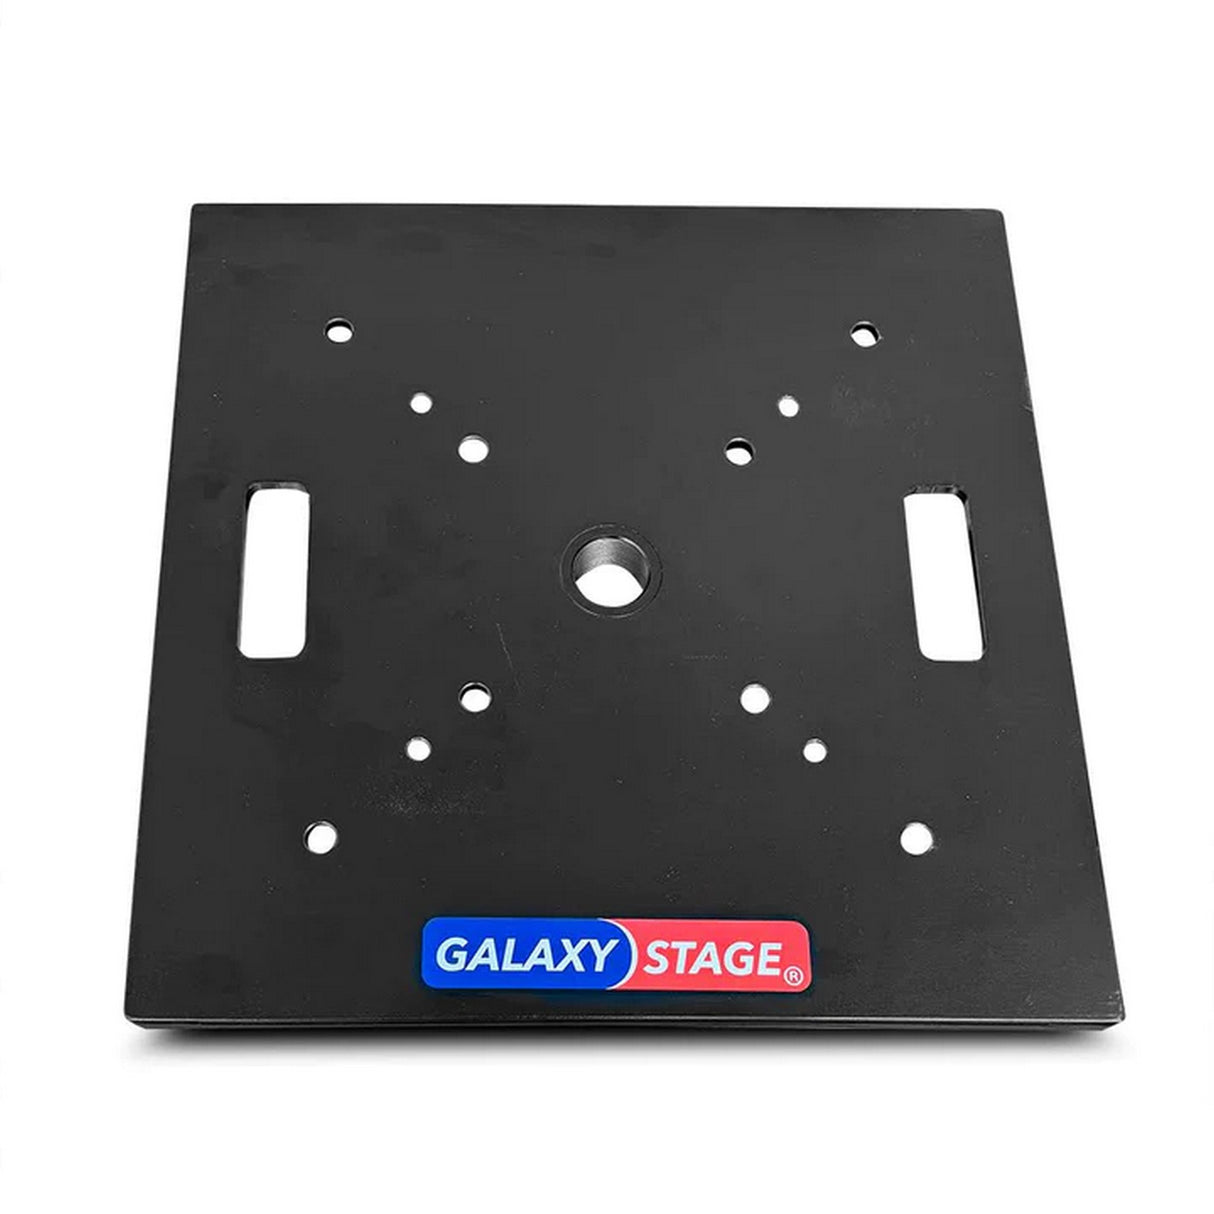 Galaxy Stage GS-U22BPS 22-Inch Steel Base Plate for GS12/20, and GS34